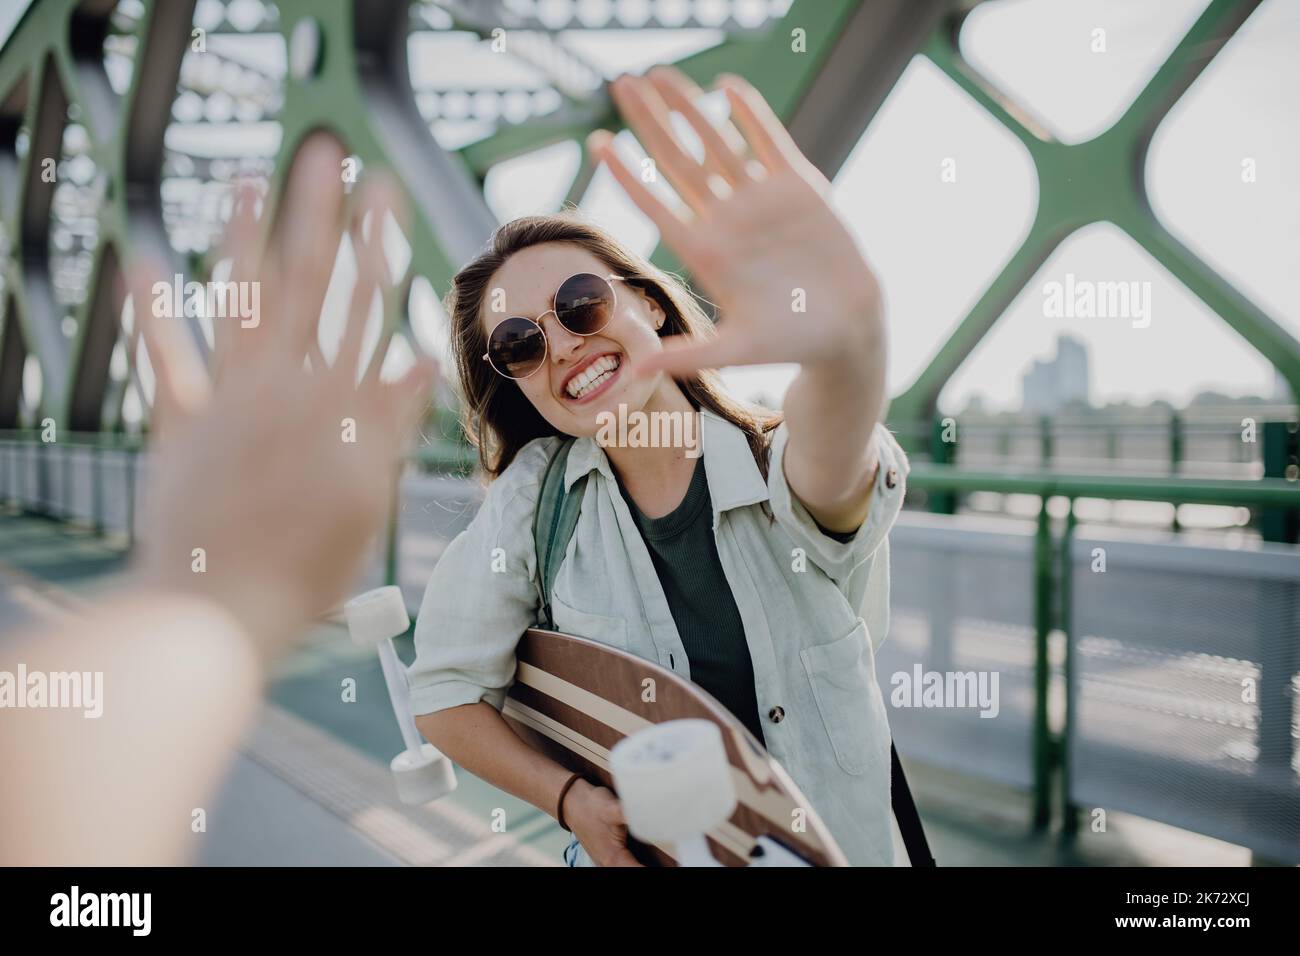 Young woman on city bridge with skateboard greating someone. Youth culture and commuting concept. Stock Photo